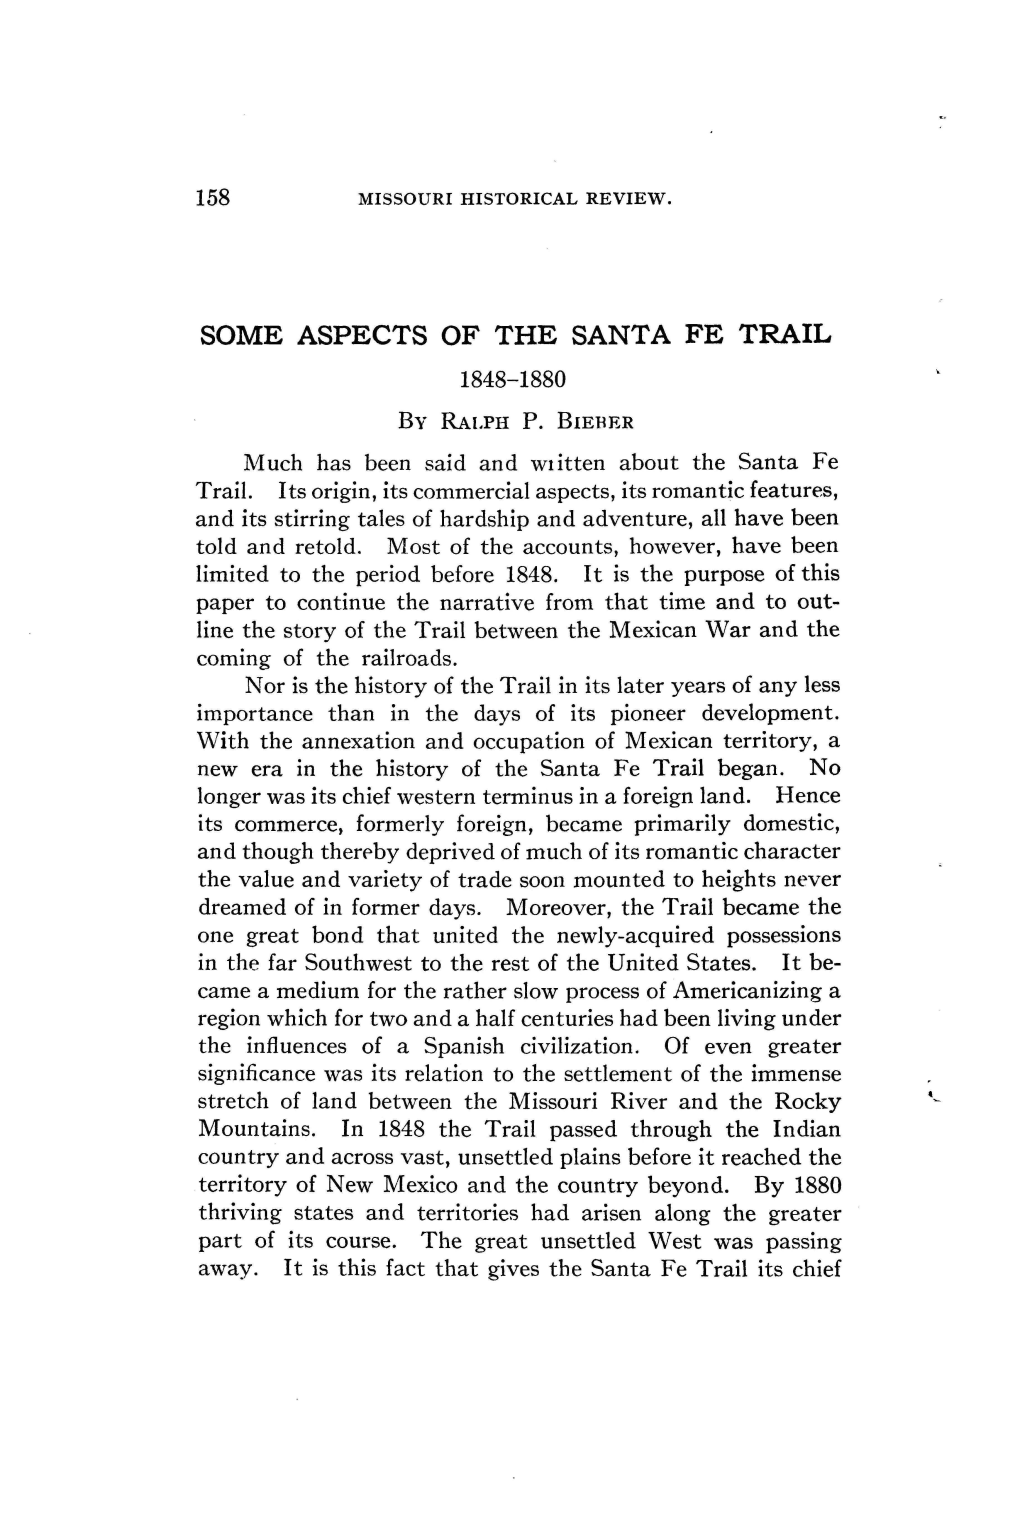 Some Aspects of the Santa Fe Trail 1848-1880